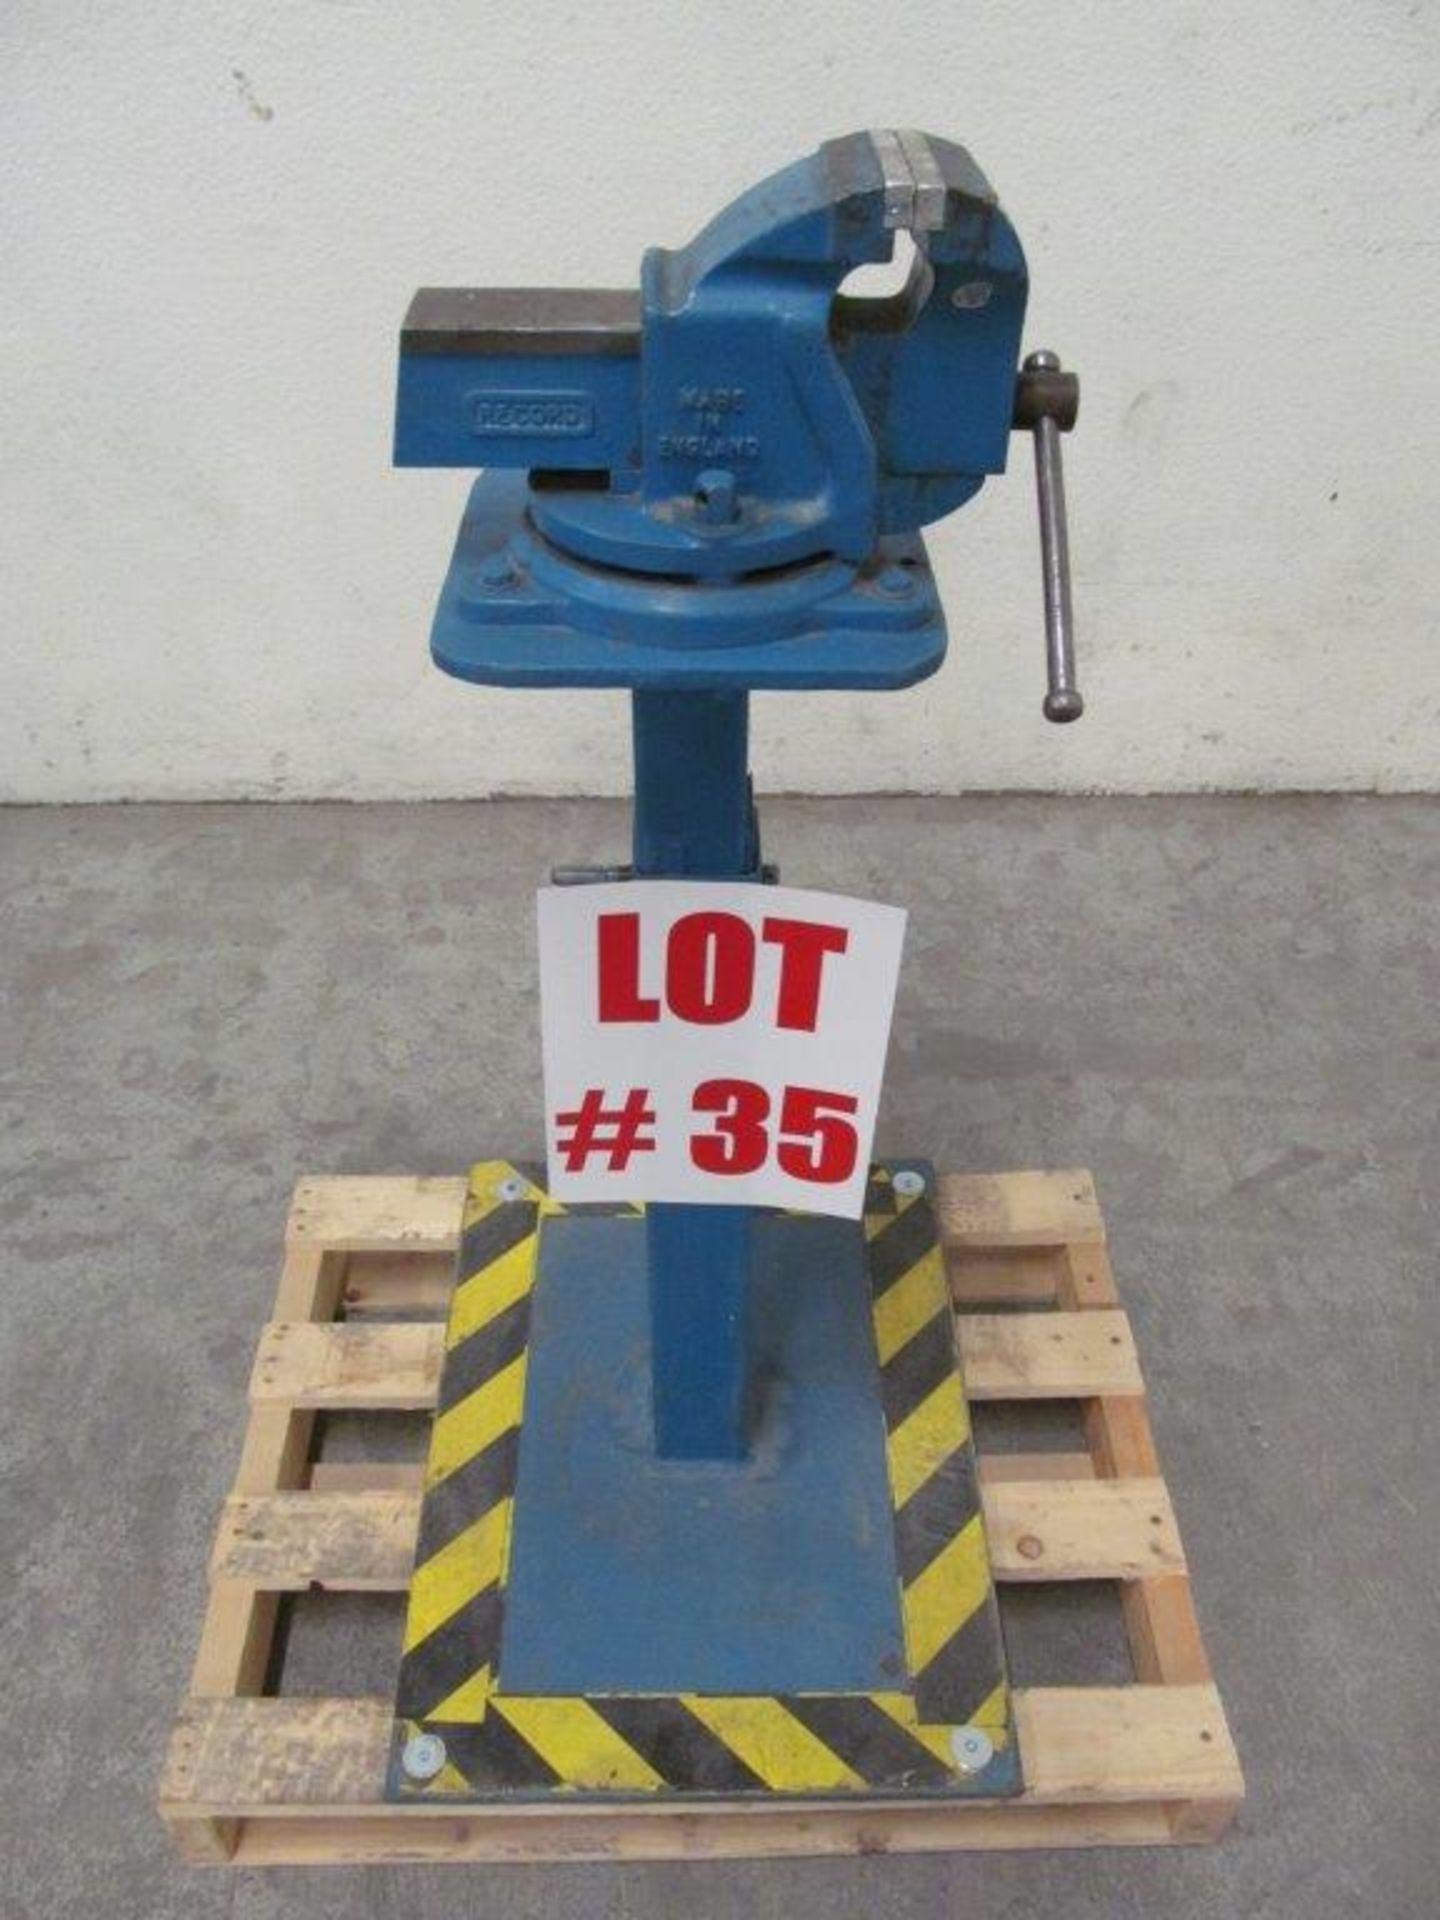 RECORD 4'' BENCH VISE ON STAND - LOCATION - HAWKESBURY, ONTARIO